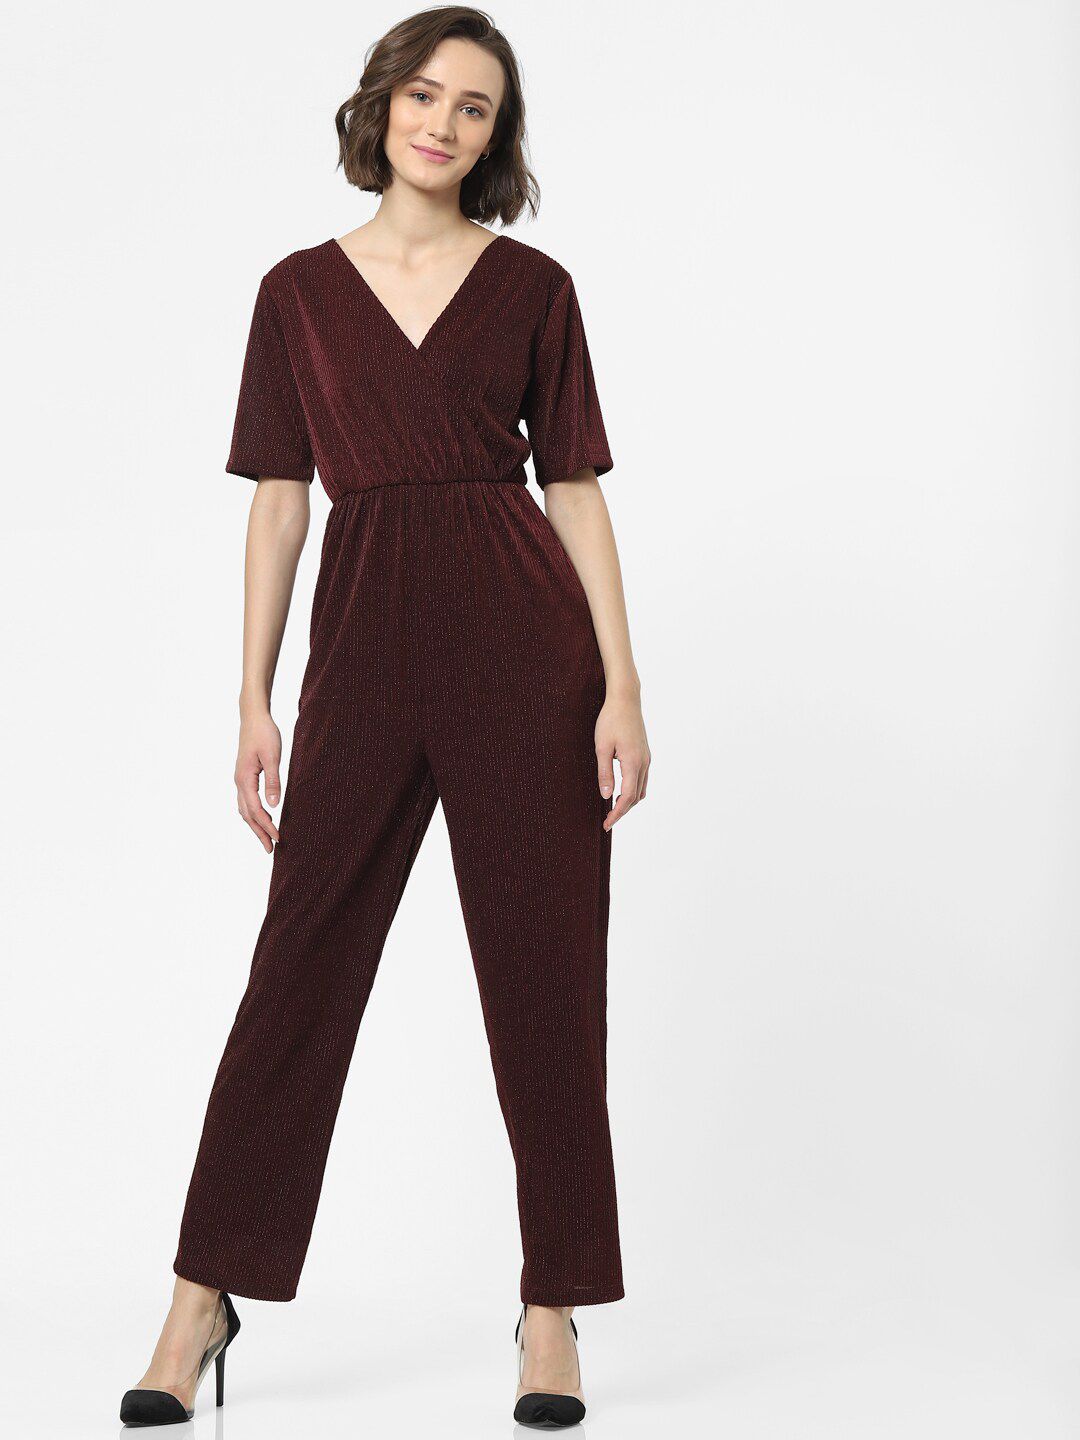 ONLY Women's Maroon Basic Jumpsuit Price in India